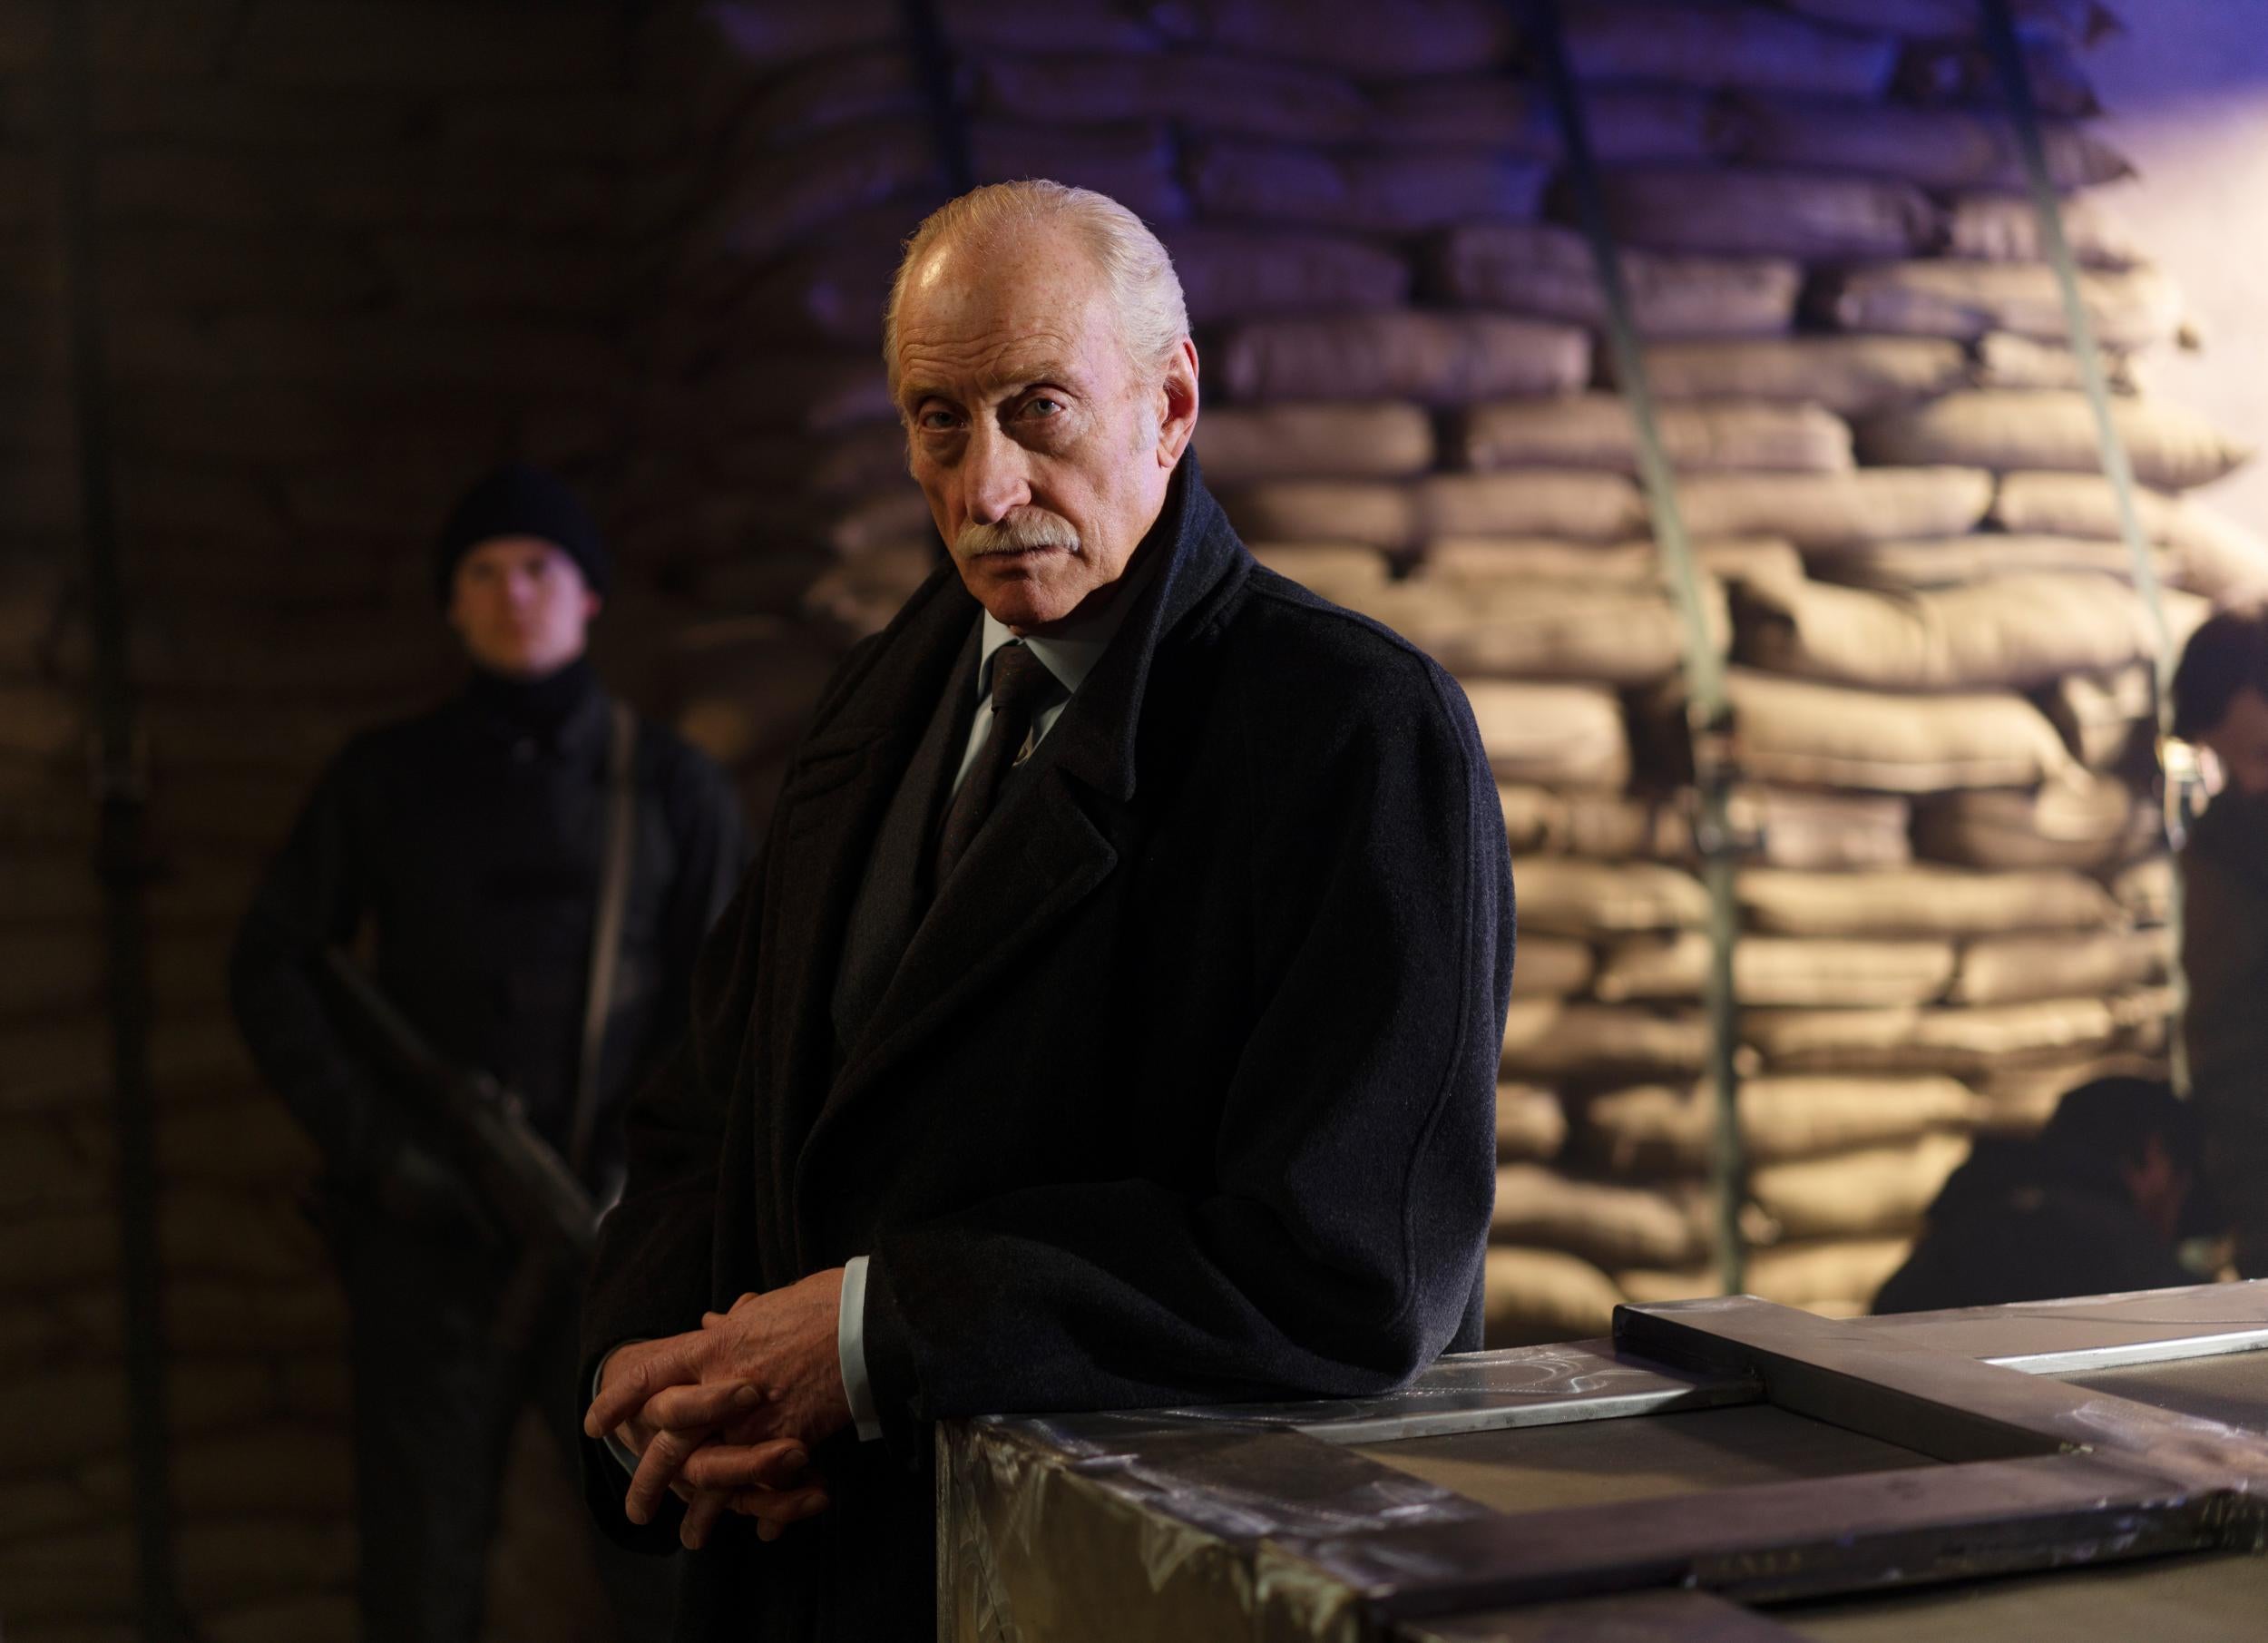 Charles Dance joins the cast of BBC spy drama ‘The Little Drummer Girl’